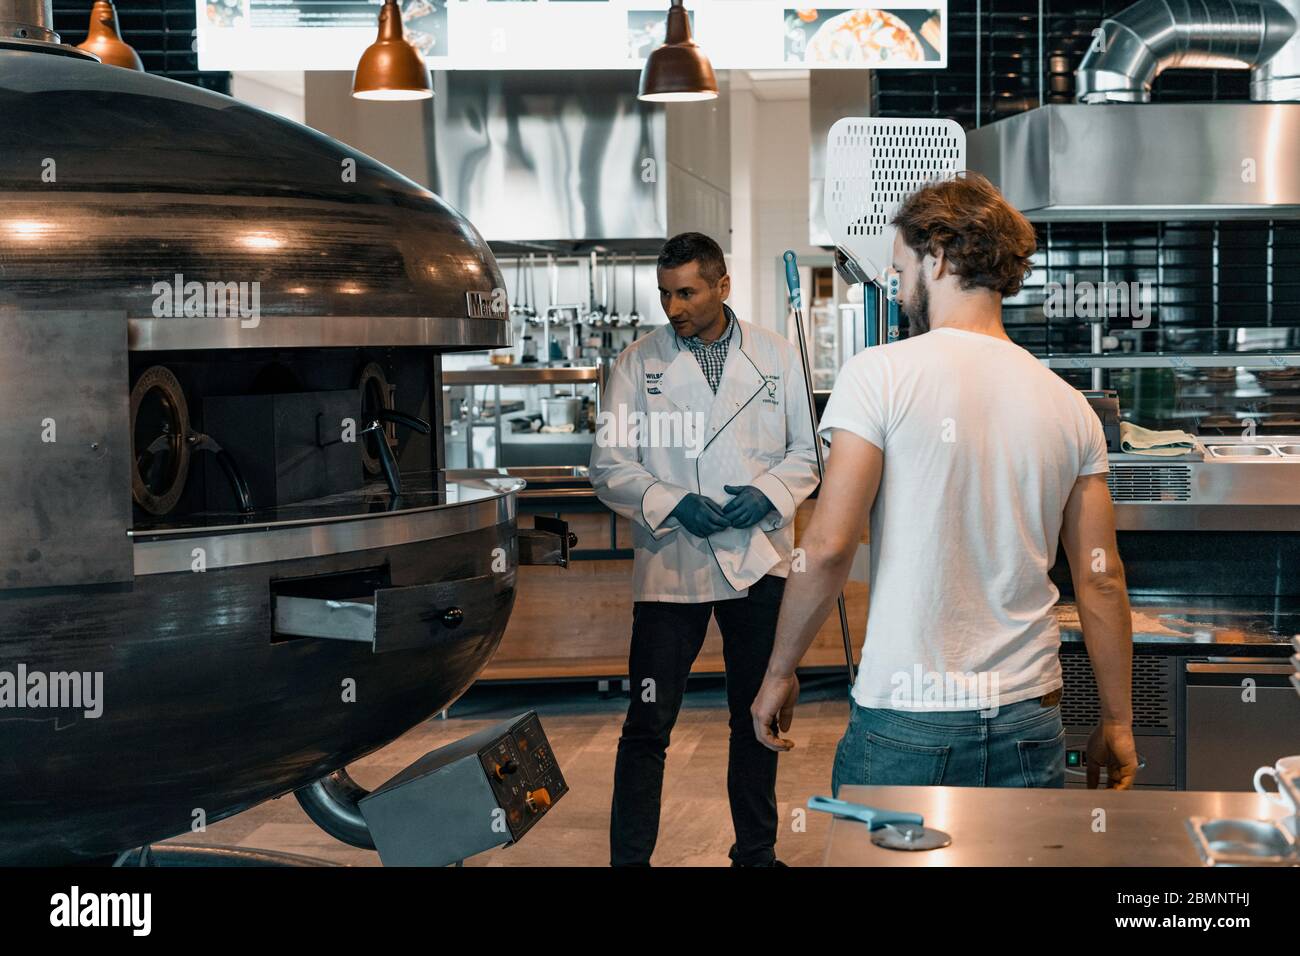 Wroclaw, Poland, December 20 2019.Opening of restaurant in Shell station placed in Katy Wroclawskie. Kitchen chef turns on Marana Forni Gea pizza oven Stock Photo